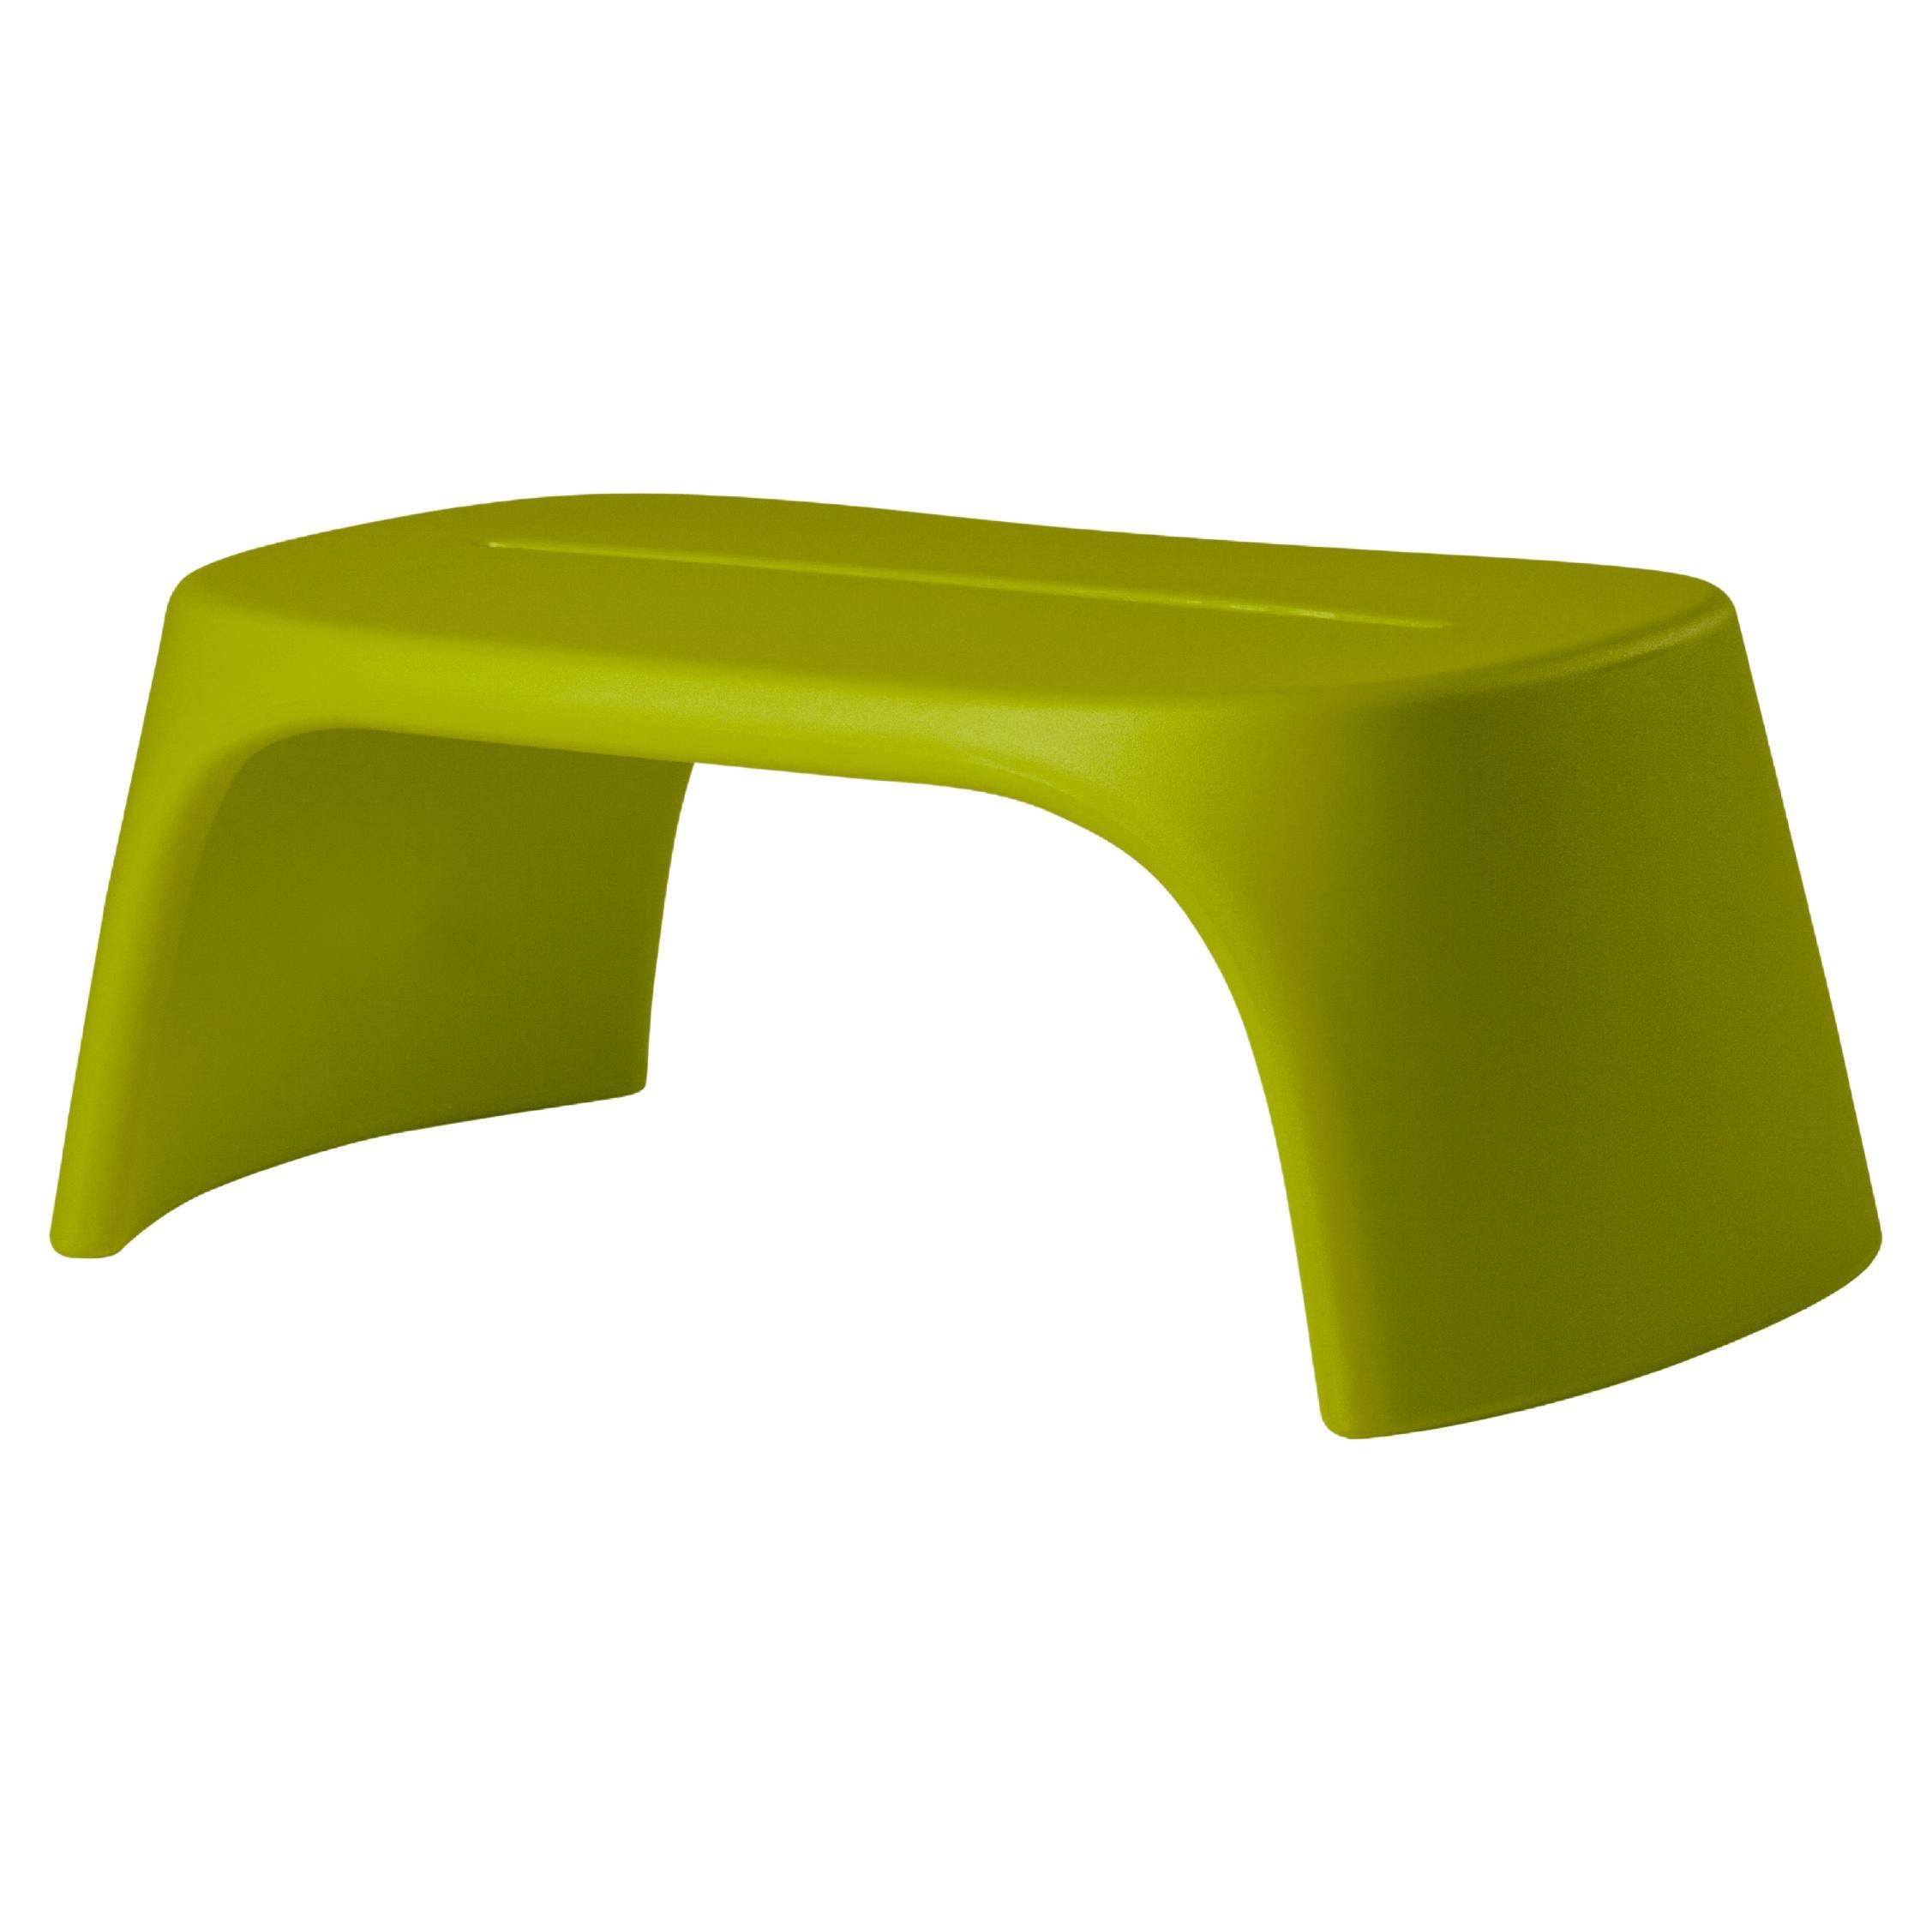 Slide Design Amélie Panchetta Bench in Lime Green by Italo Pertichini For Sale